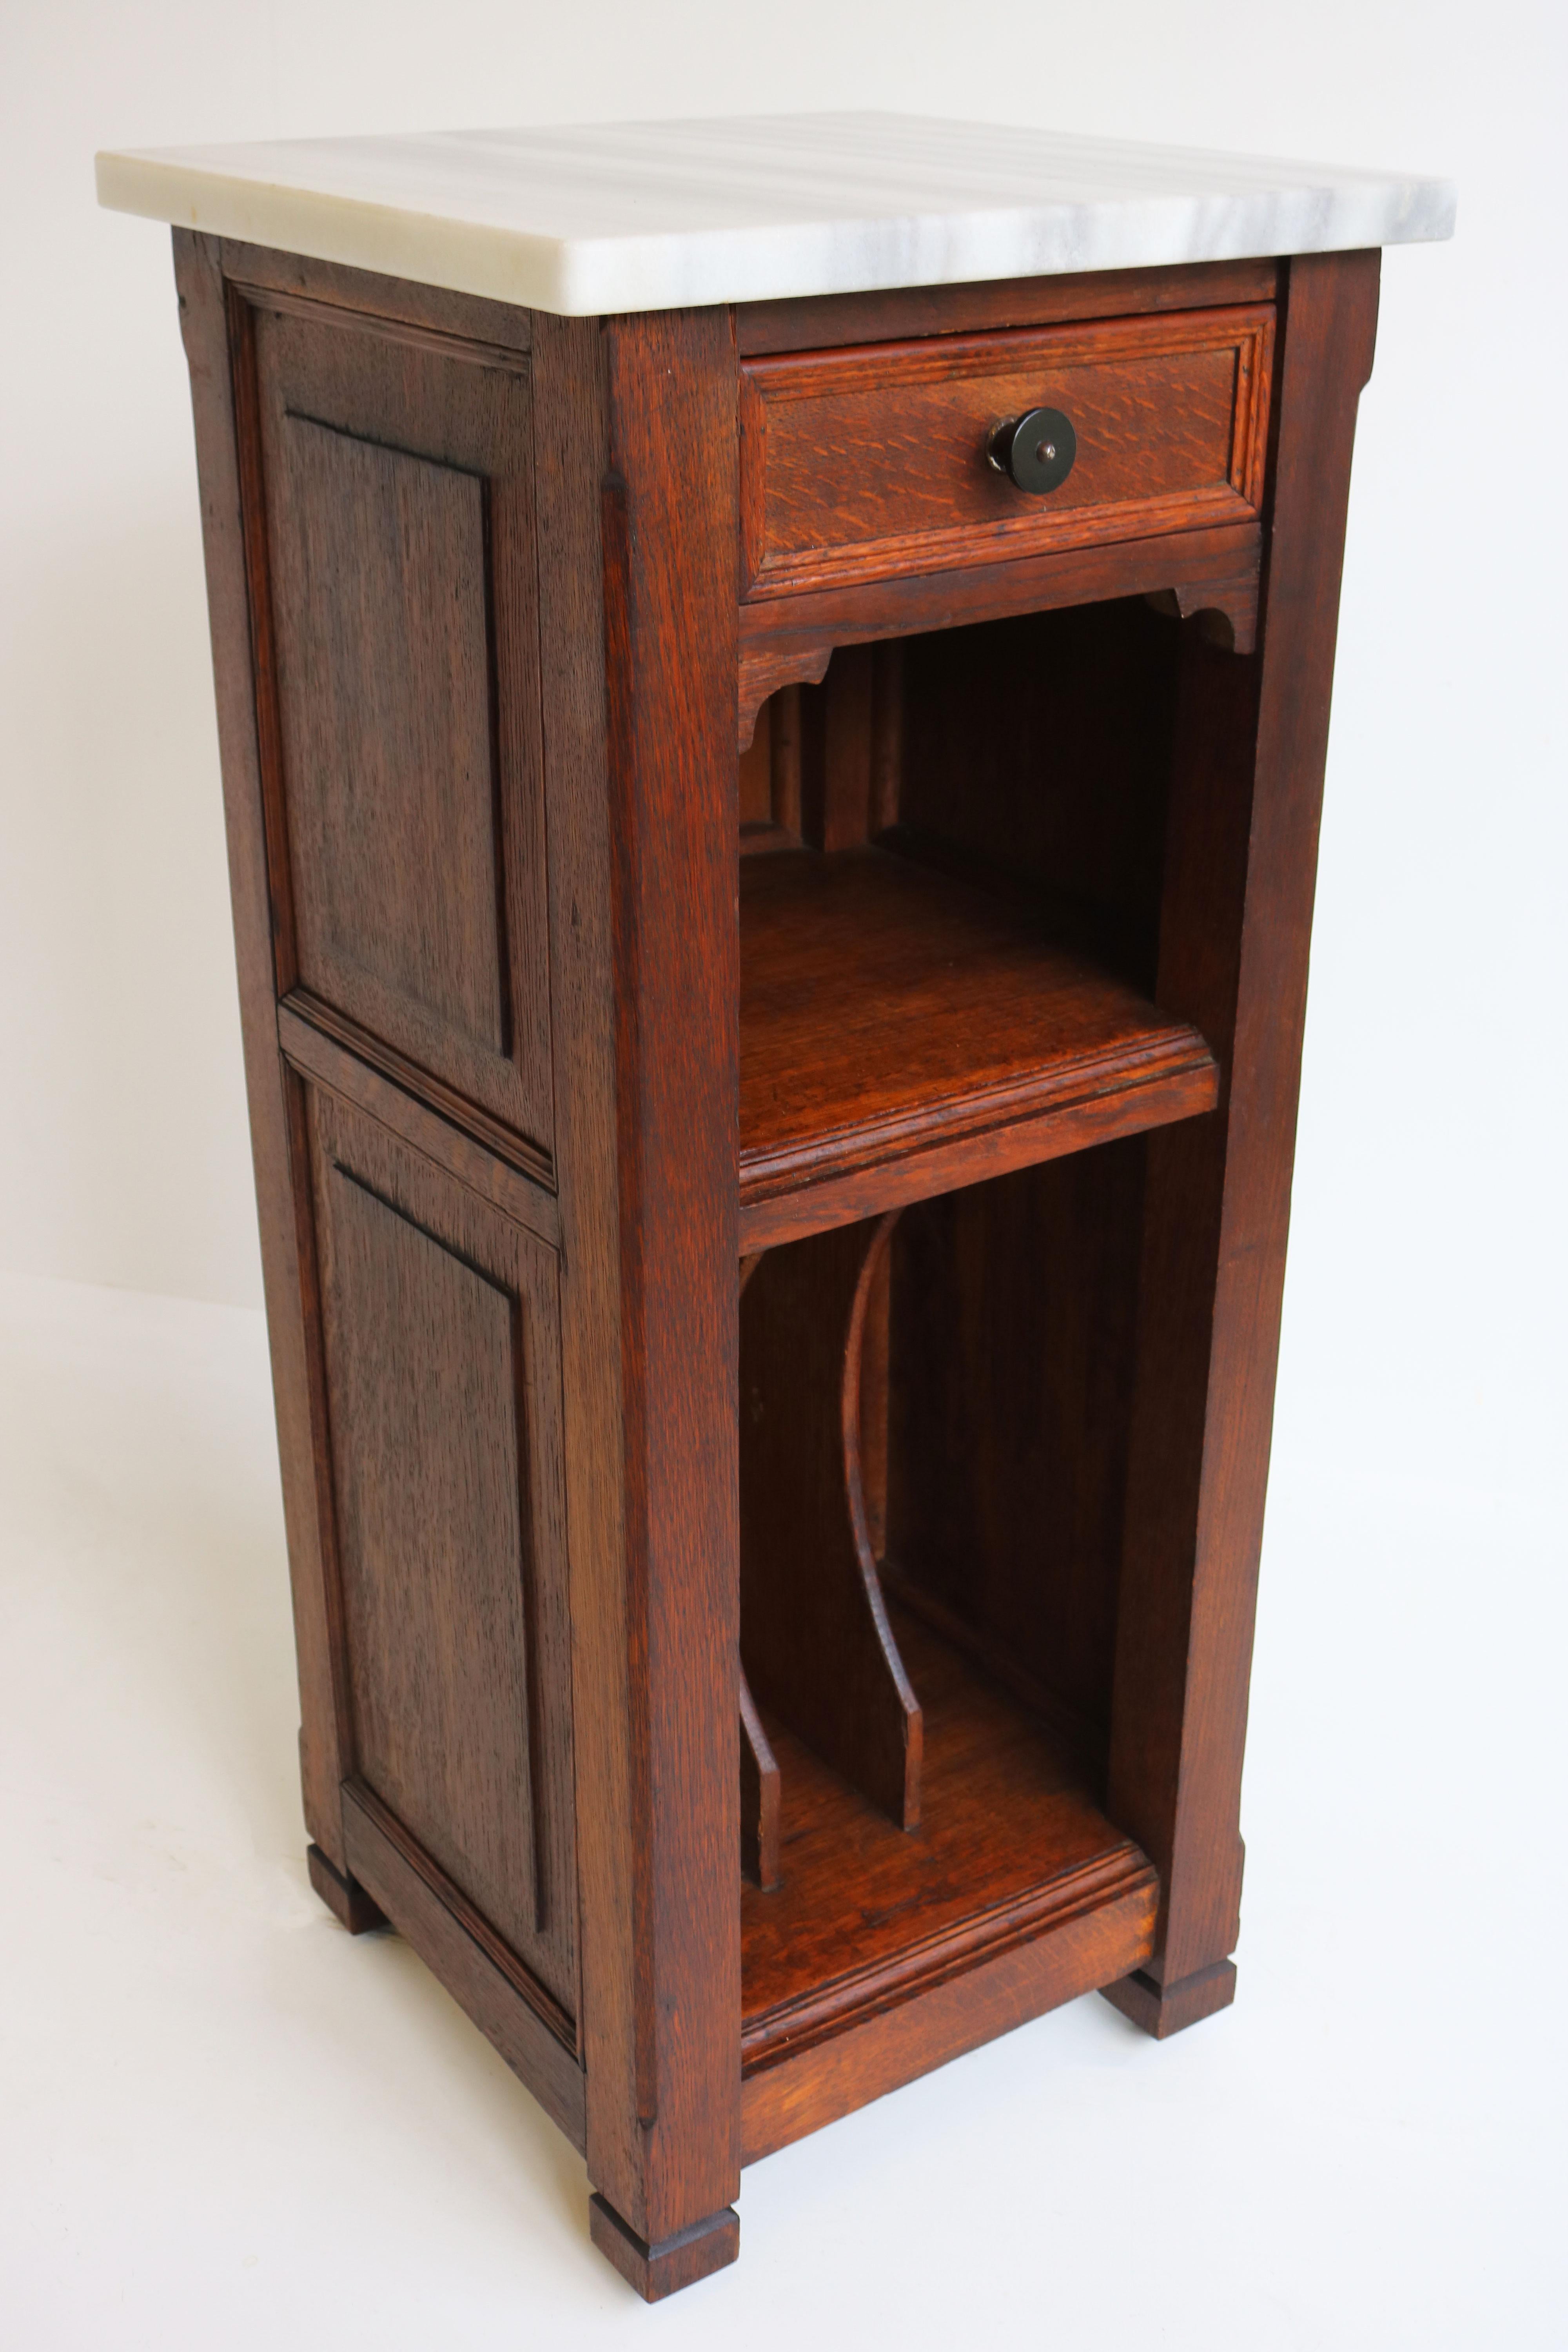 Hand-Crafted Antique French Art Deco Nightstand / Record Cabinet 1920 Solid Oak Marble Top For Sale